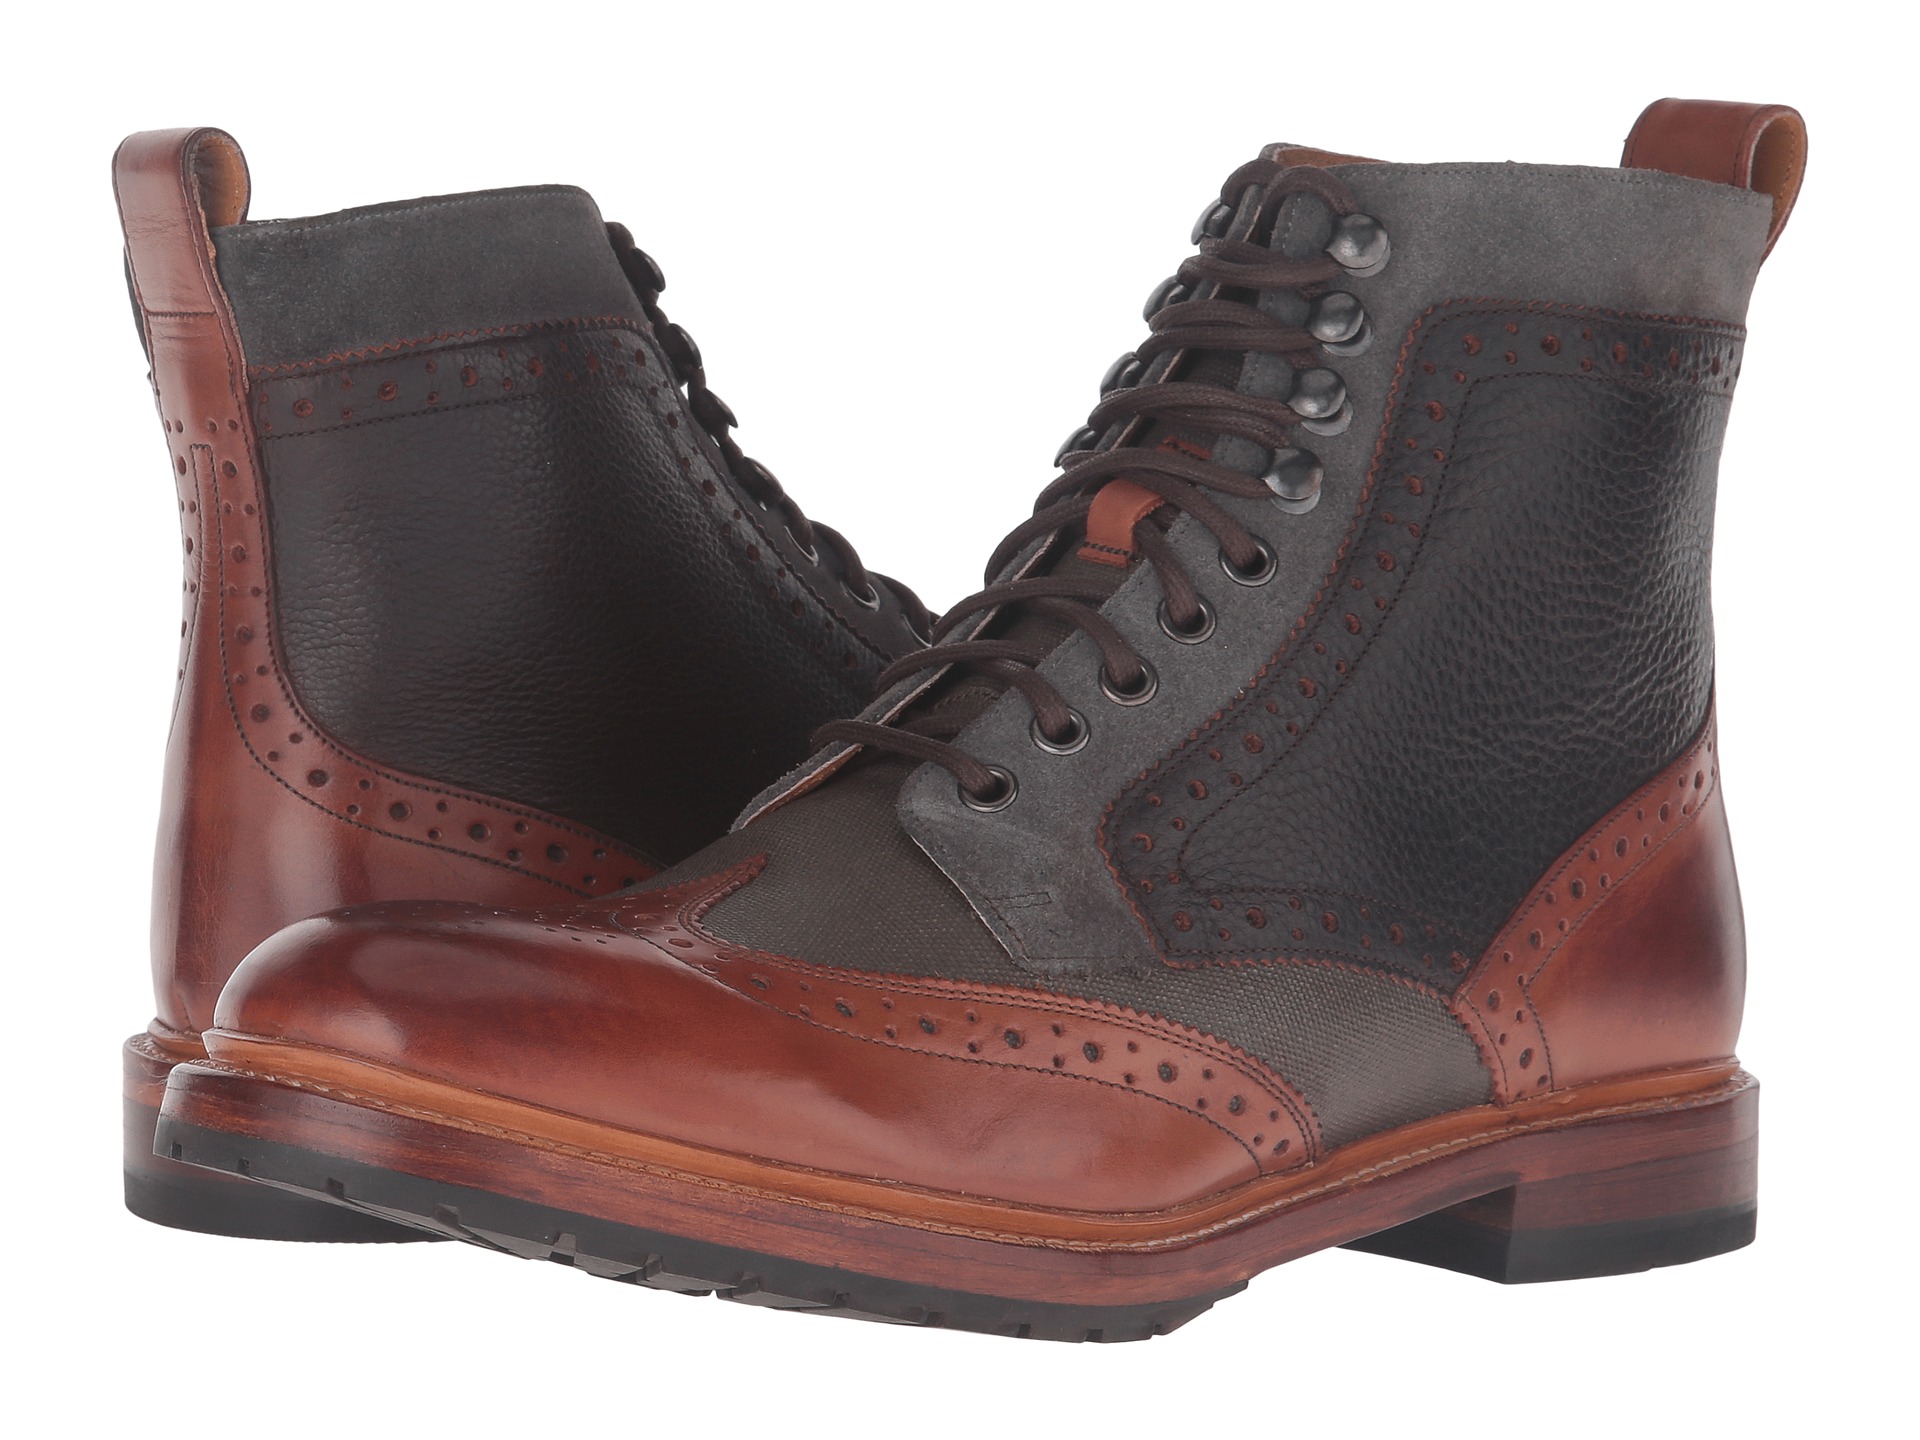 Stacy Adams Madison II Wingtip Lace Boot at Zappos.com